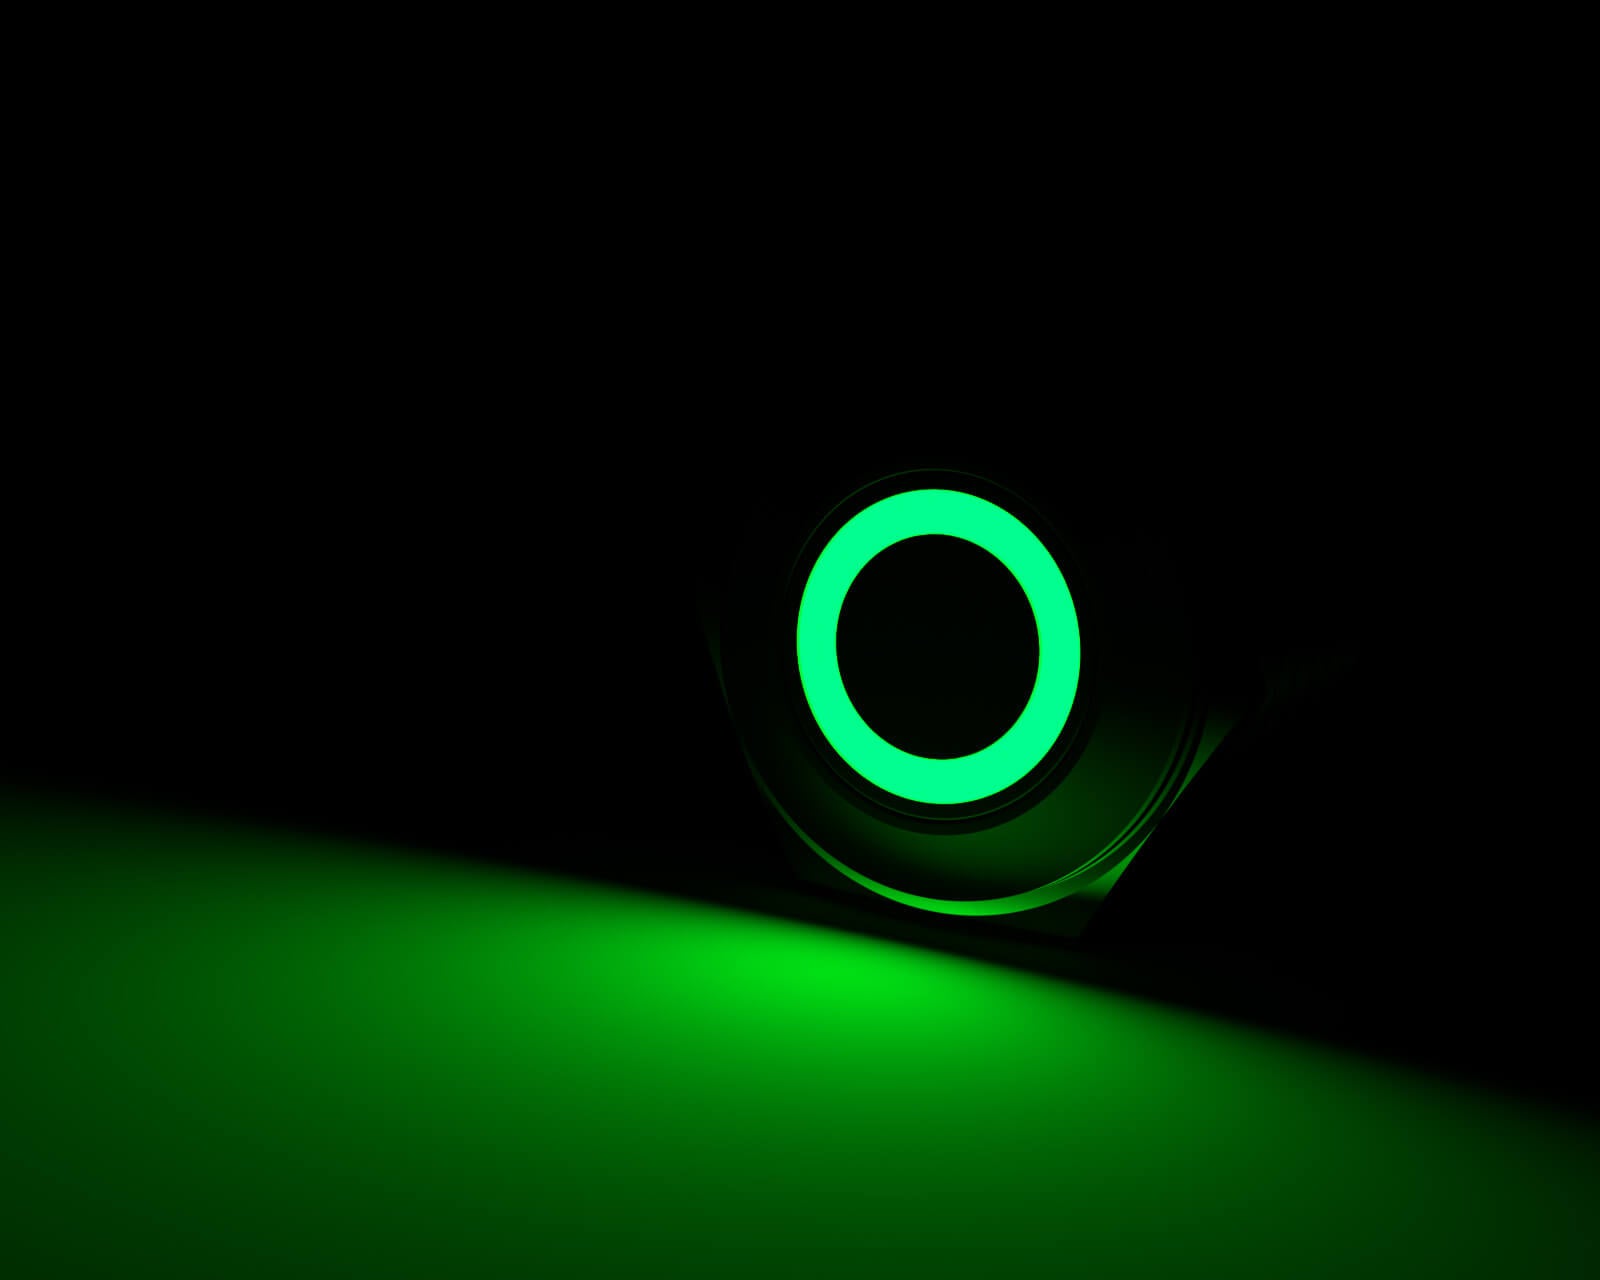 PrimoChill Silver Aluminum Latching Vandal Switch - 16mm - Ring Illumination - Green LED - Green LED Ring